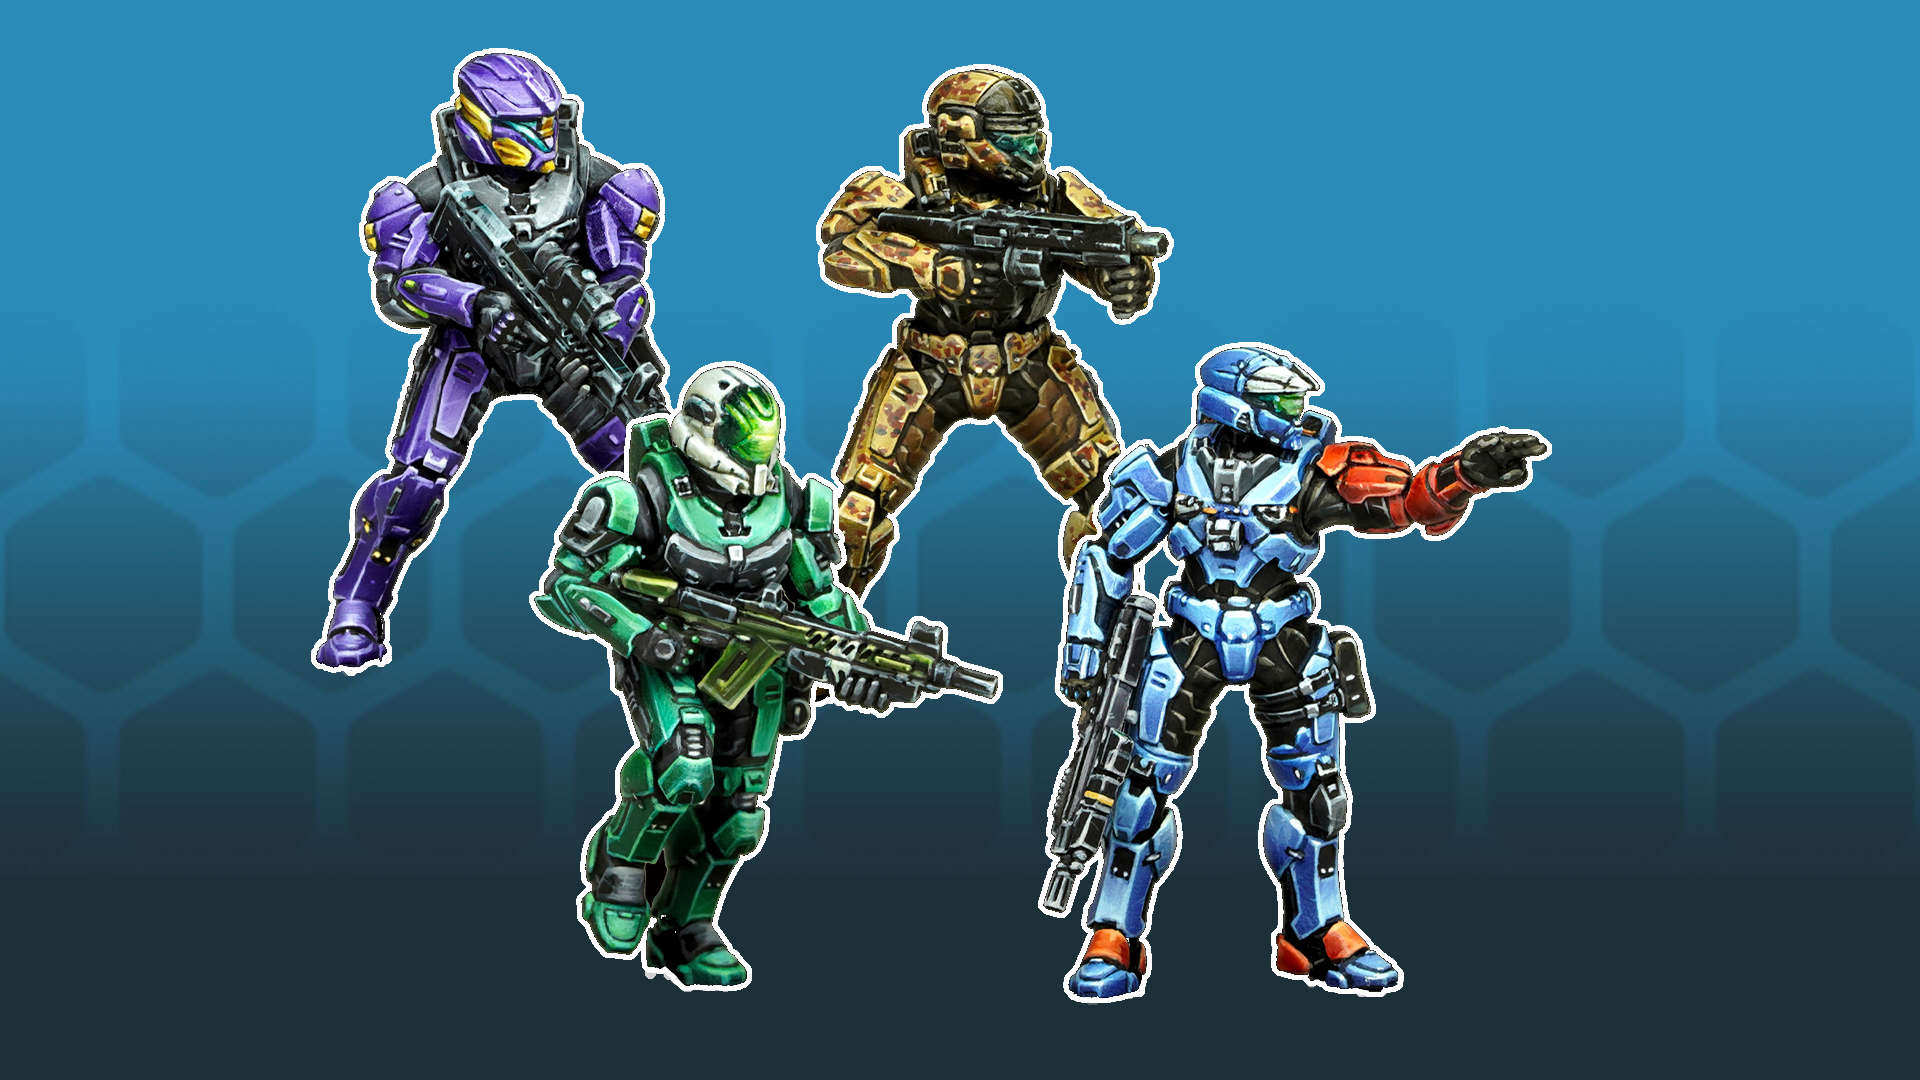 New Halo Miniature Game Preview Highlights Badass Spartans in Action